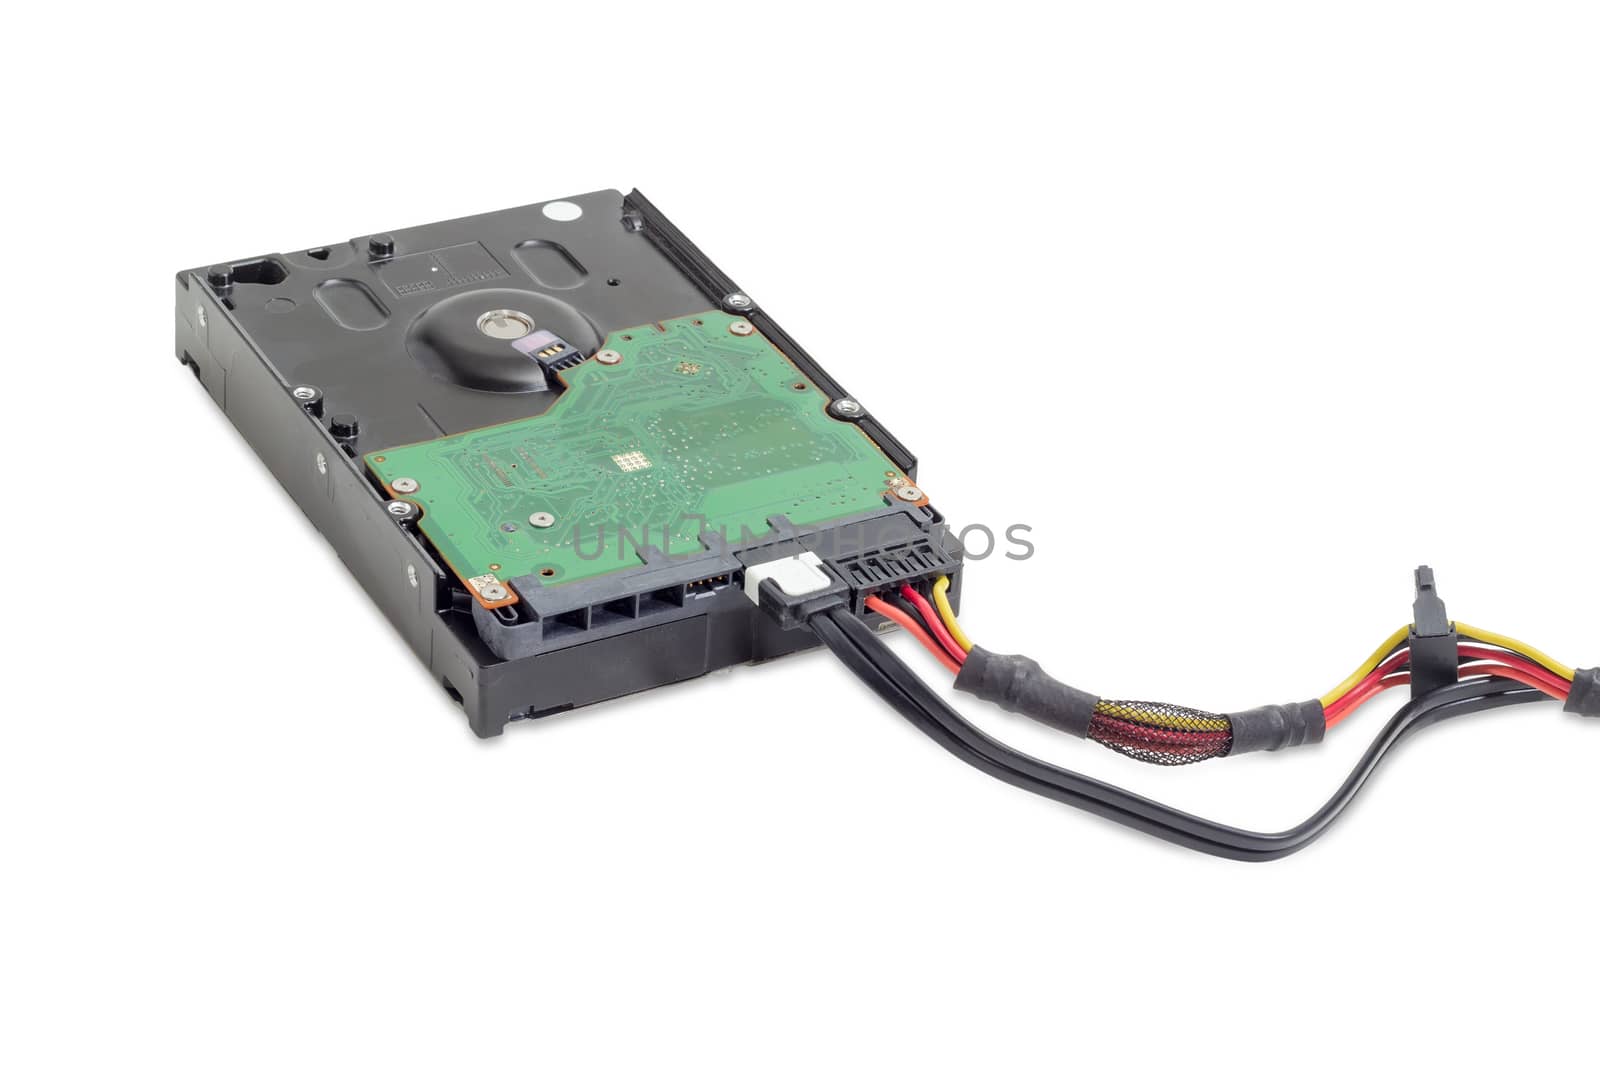 Hard disk drive with connected cables on a white background by anmbph